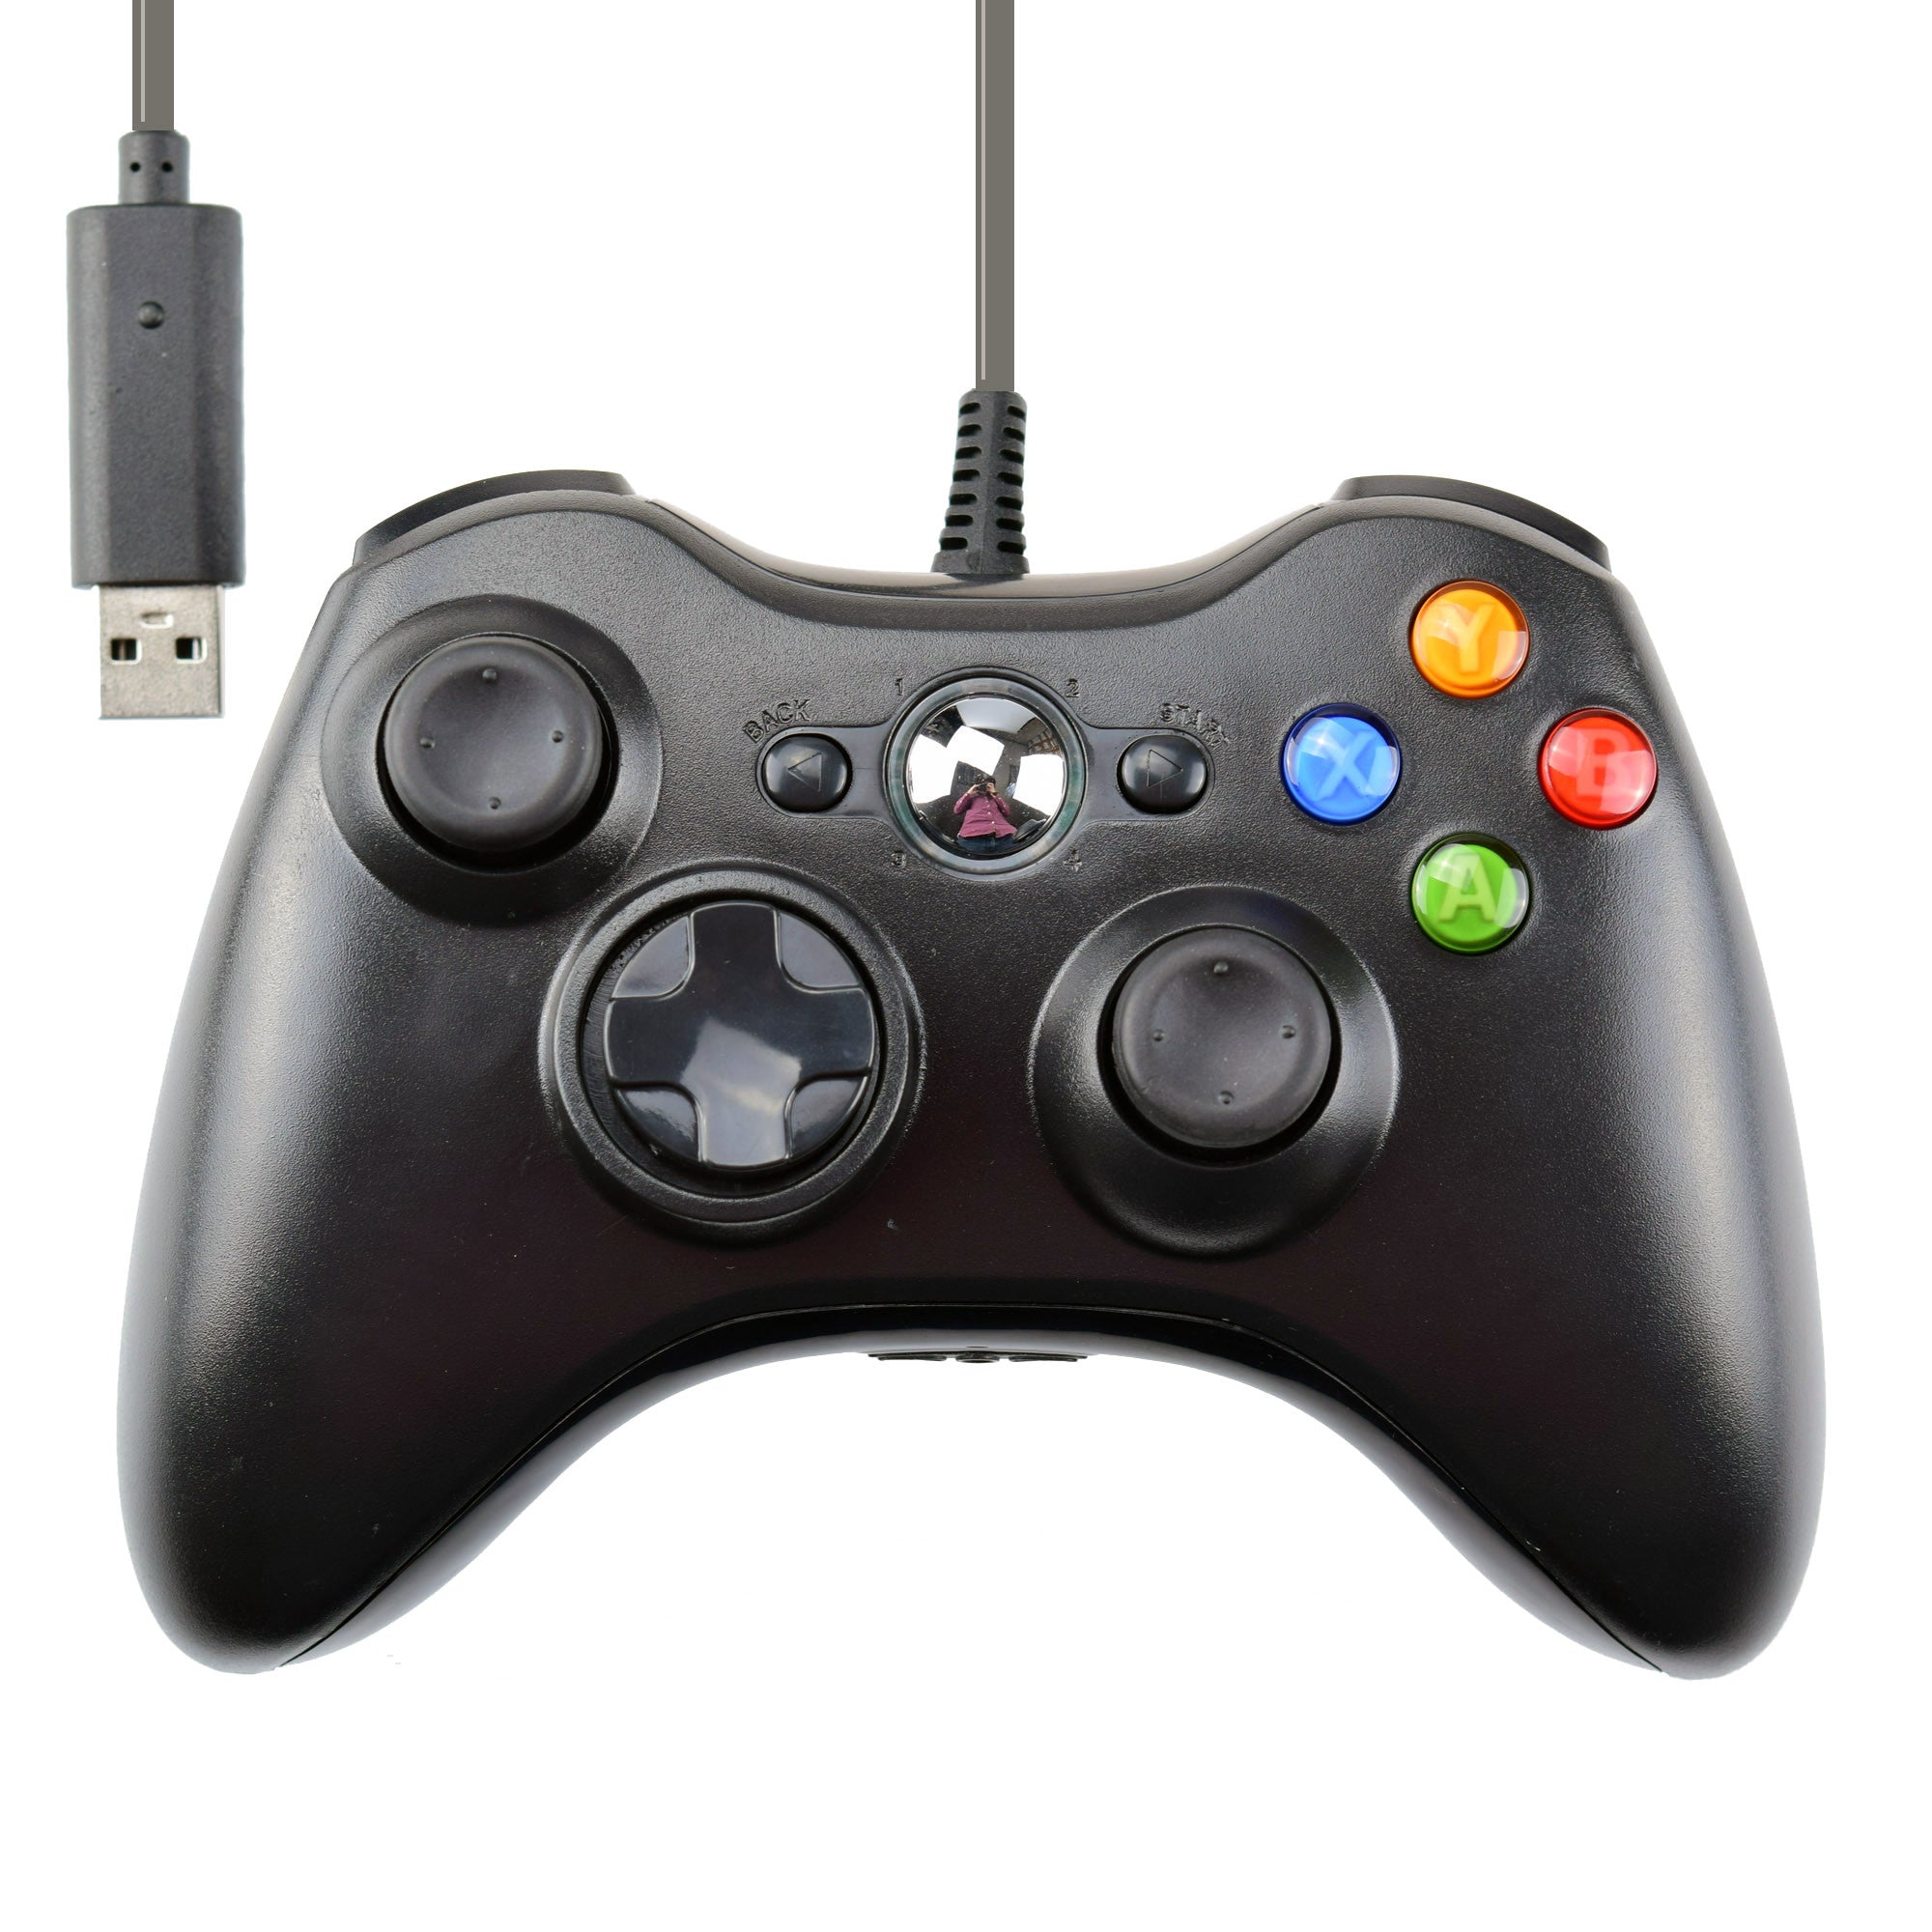 Xbox 360 Slim Windows 7 Wired USB Game Pad Controller ...